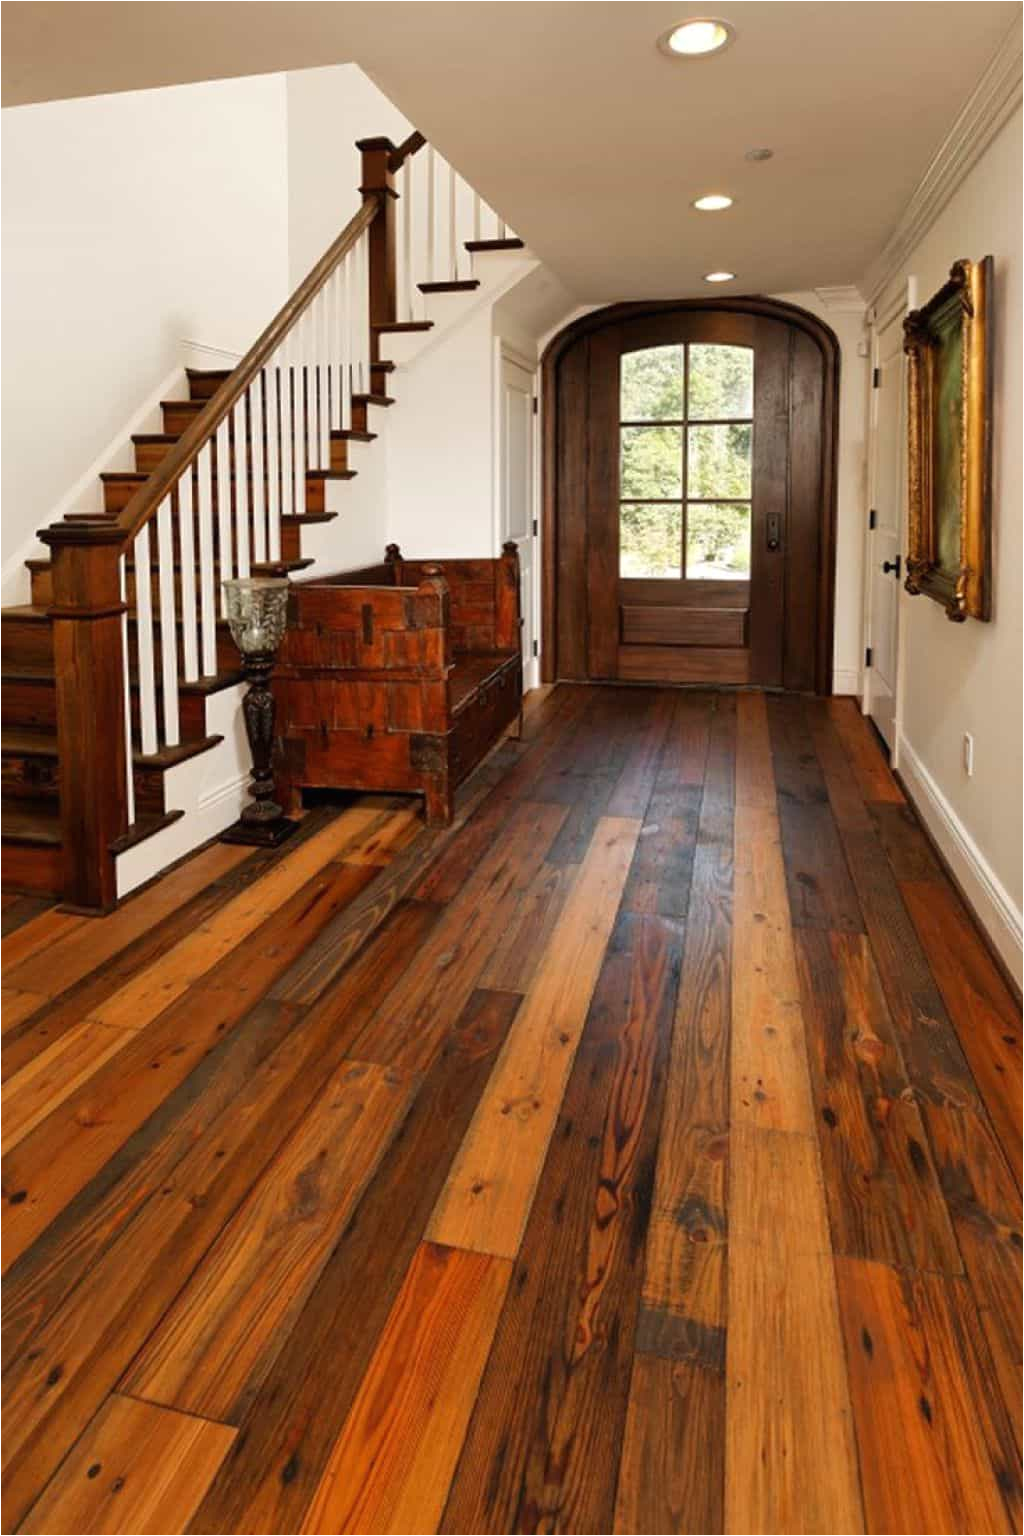 foyer designed with white walls and recycled wood flooring